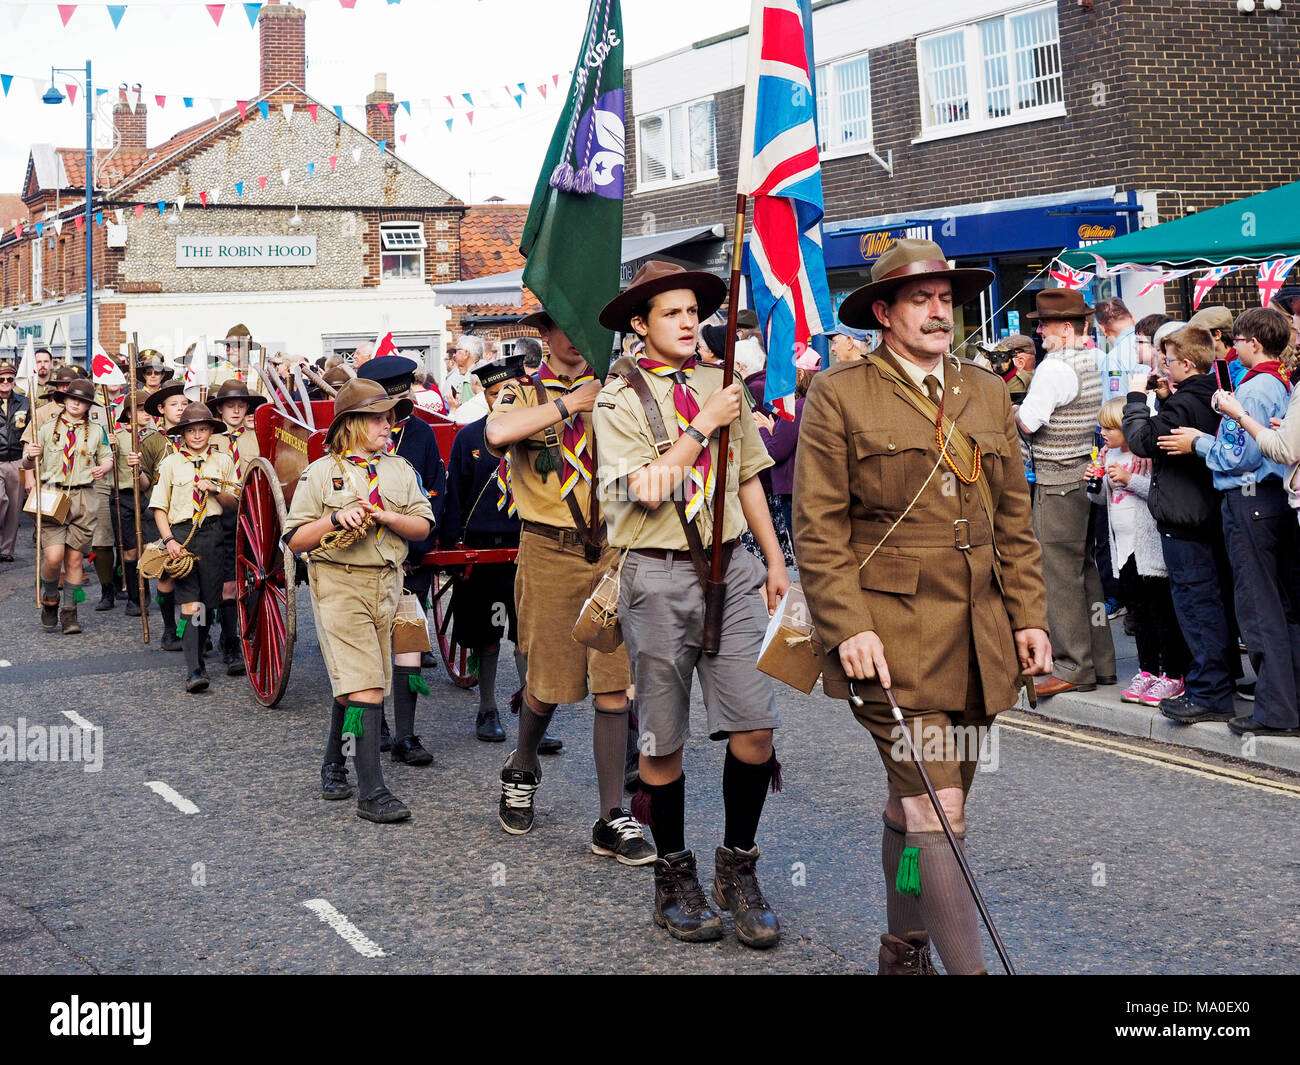 A carnival atmosphere at the 1940's weekend in Sheringham, Sept 2017, part of an event organised by the North Norfolk Railway. Victory parade. Stock Photo